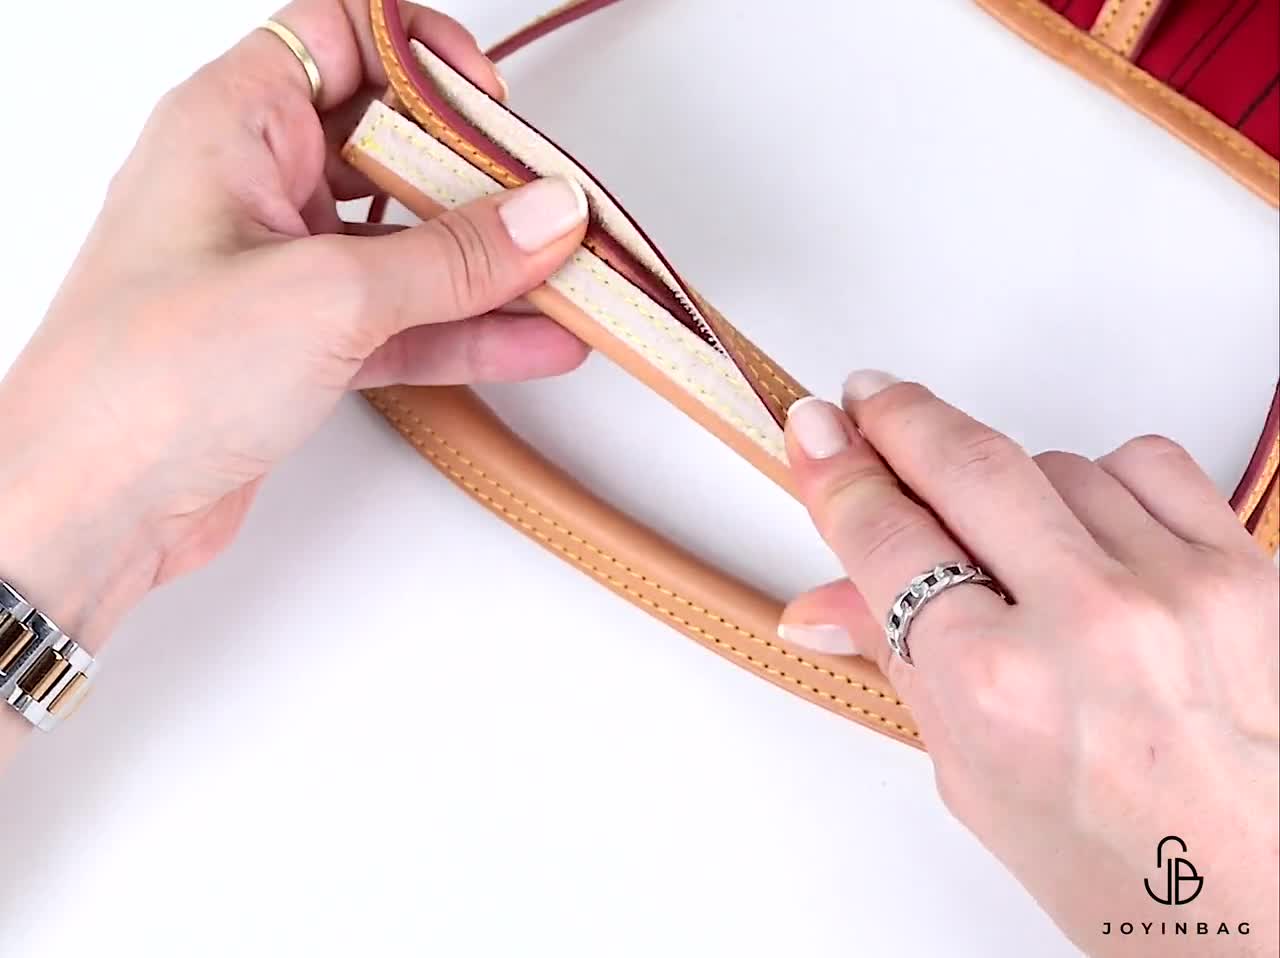 How to Clean Louis Vuitton Vachetta Leather Straps on Neverfull PM Part 1 